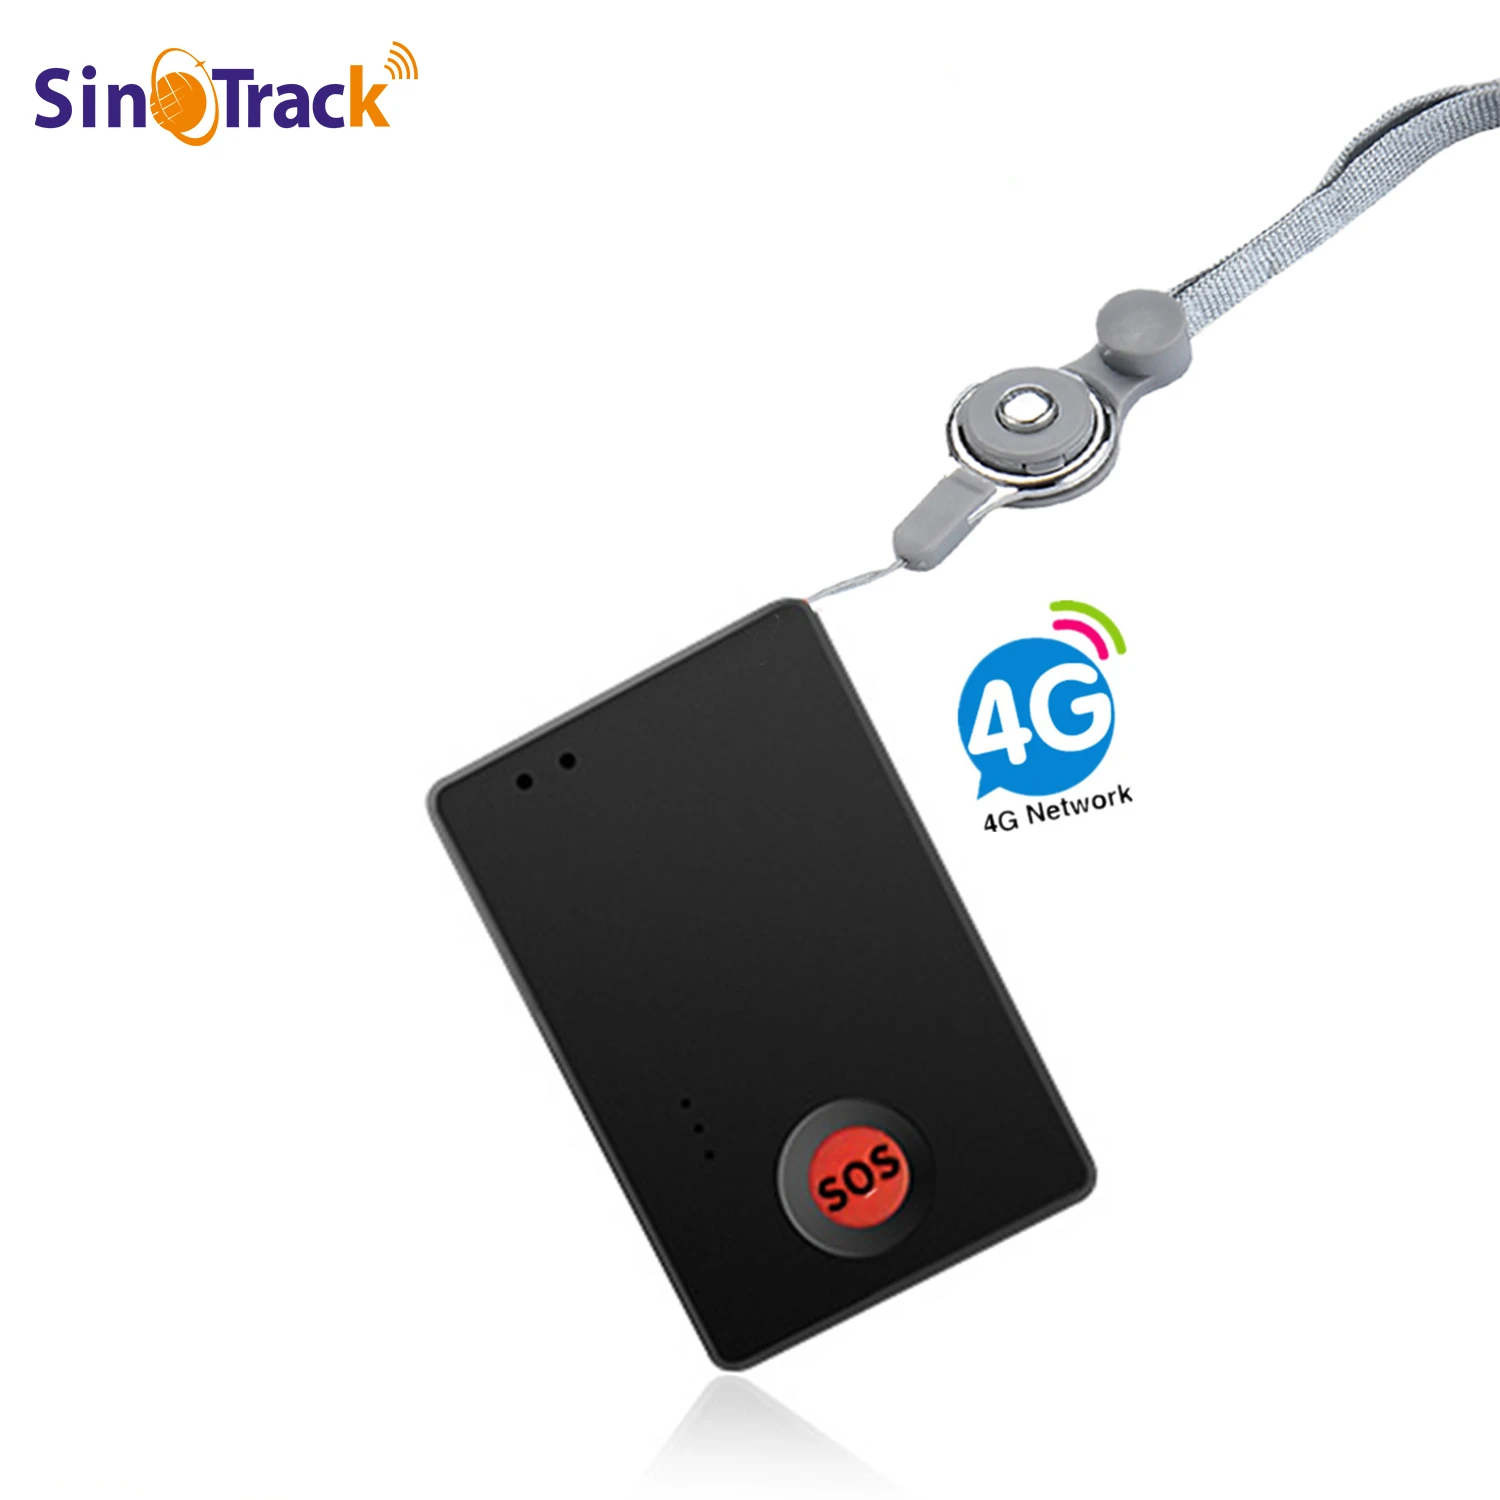 4G Mini Builtin Battery Waterproof GPS Tracker ST-904L for Kid Personal Car Pet Device with Free Tracking APP